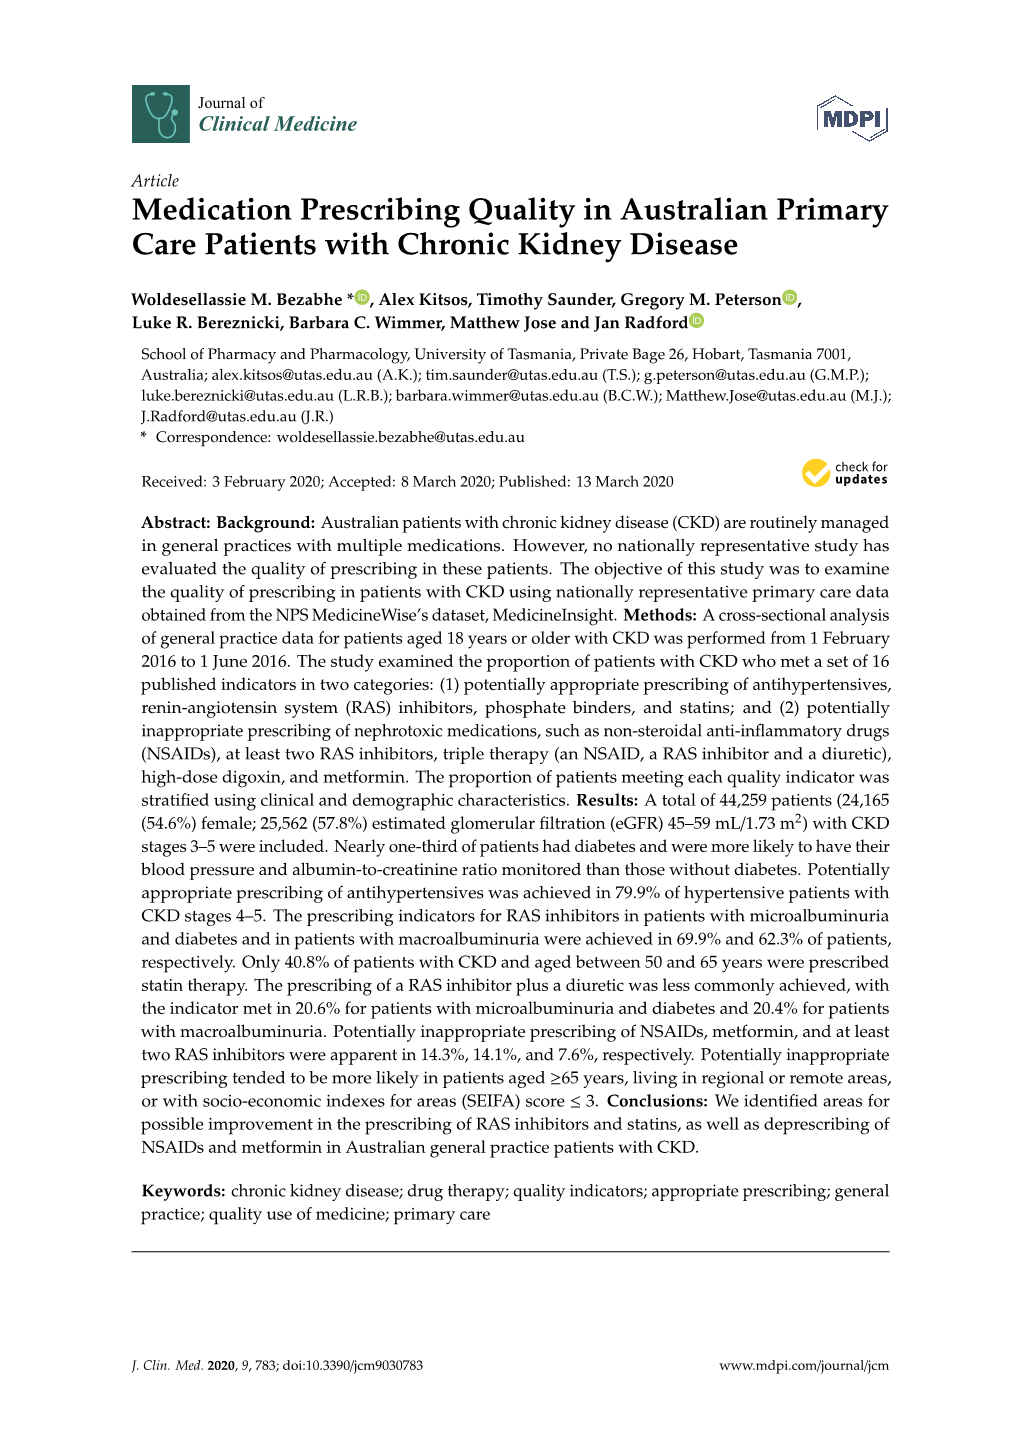 Medication Prescribing Quality in Australian Primary Care Patients with Chronic Kidney Disease